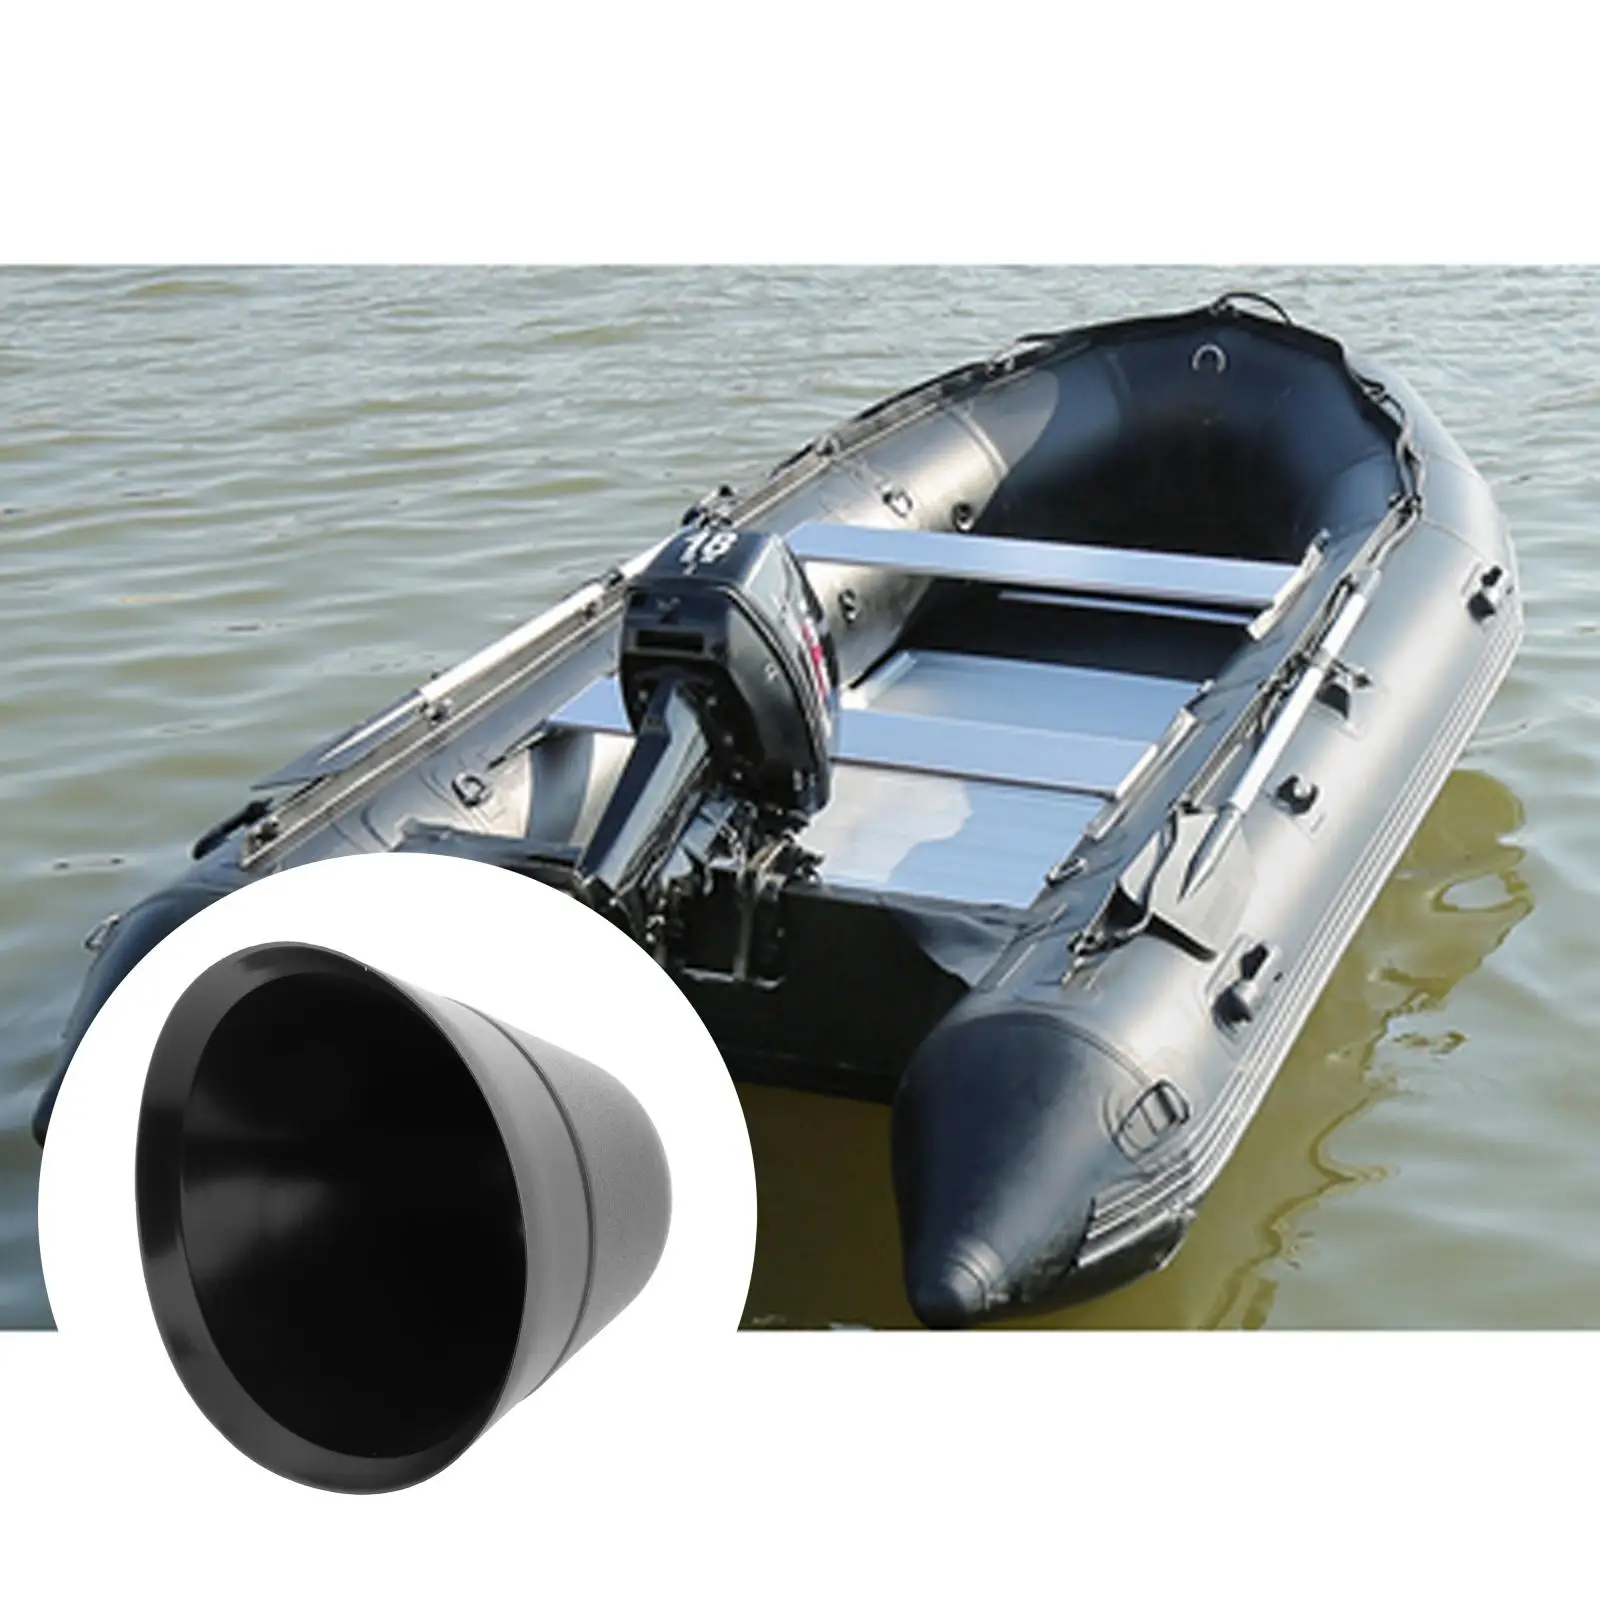 Boat Head Protector Anti-Collision Crashproof Head Prevent Impact for Yacht Kayak Rubber Dinghy Inflatable Canoe, 90 Degrees